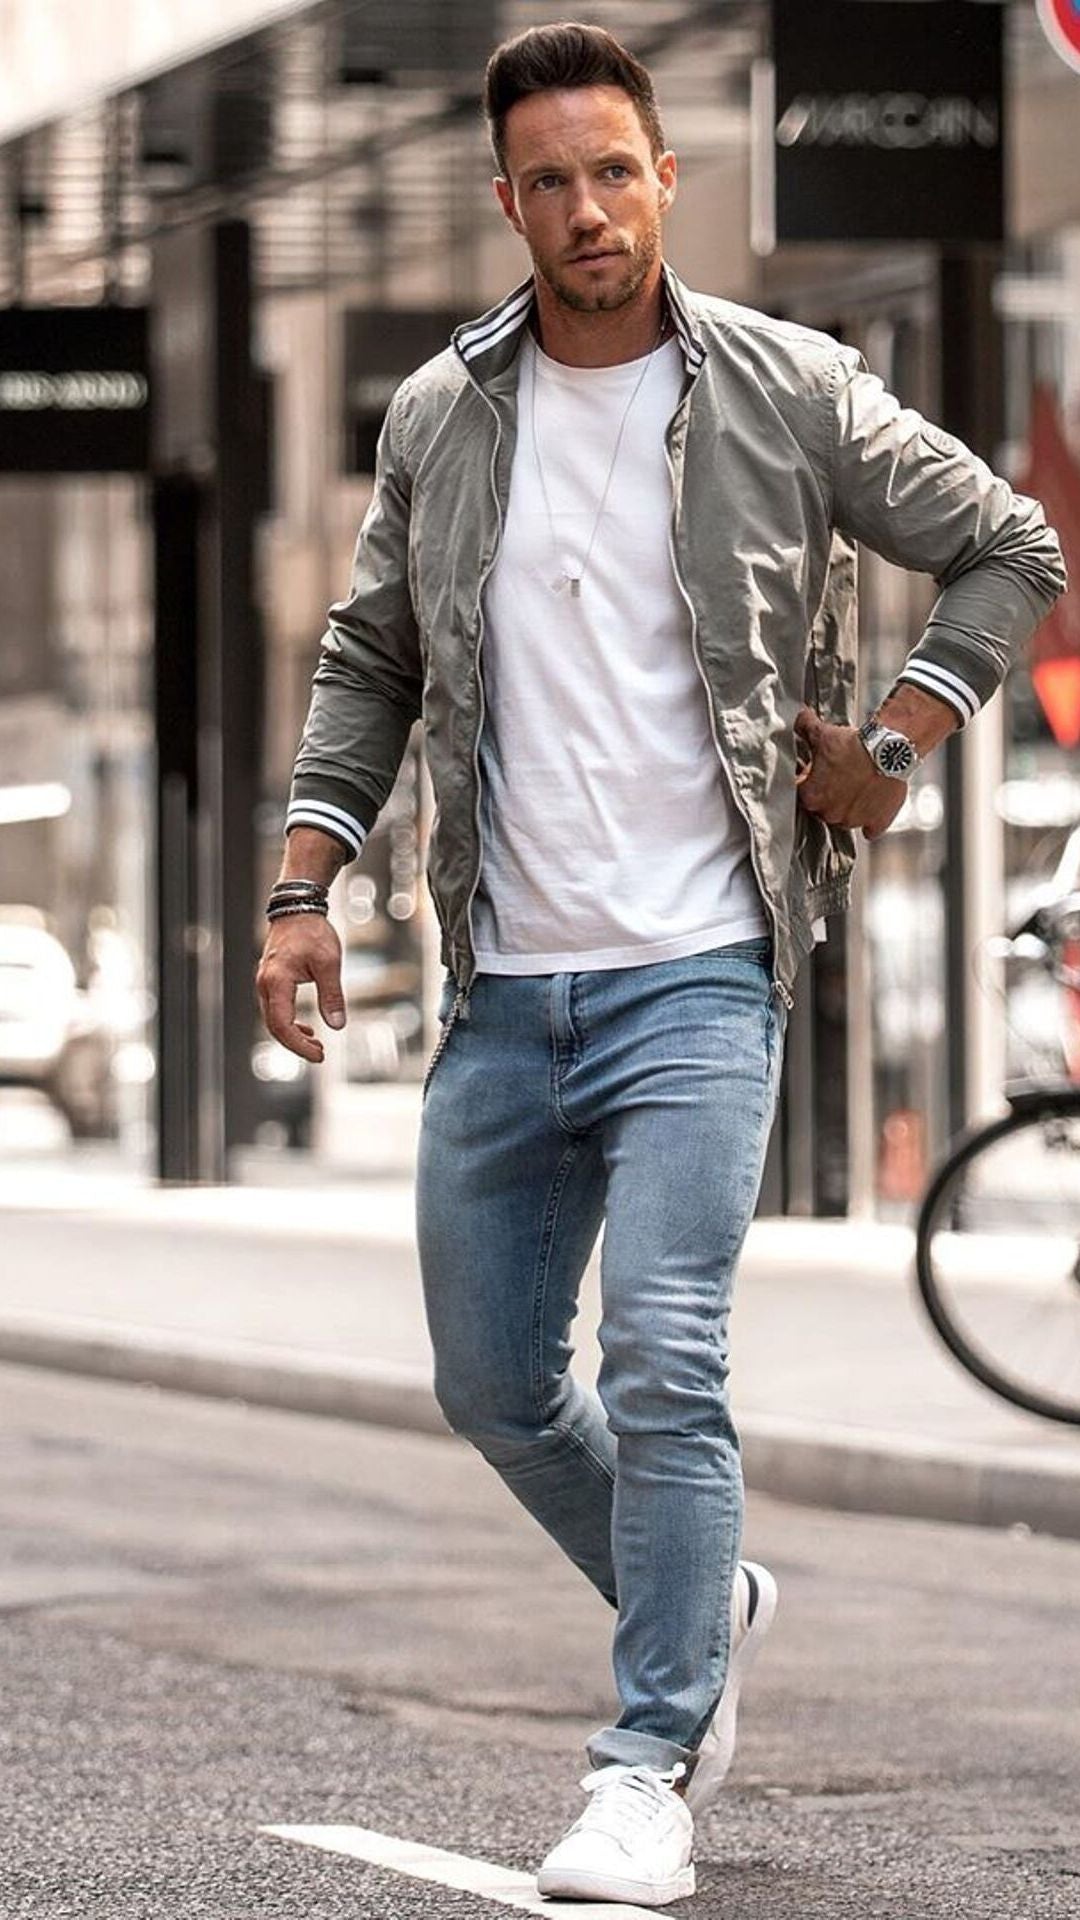 5 Casual outfits for men #mensfashion #casualoutfits #casual #style